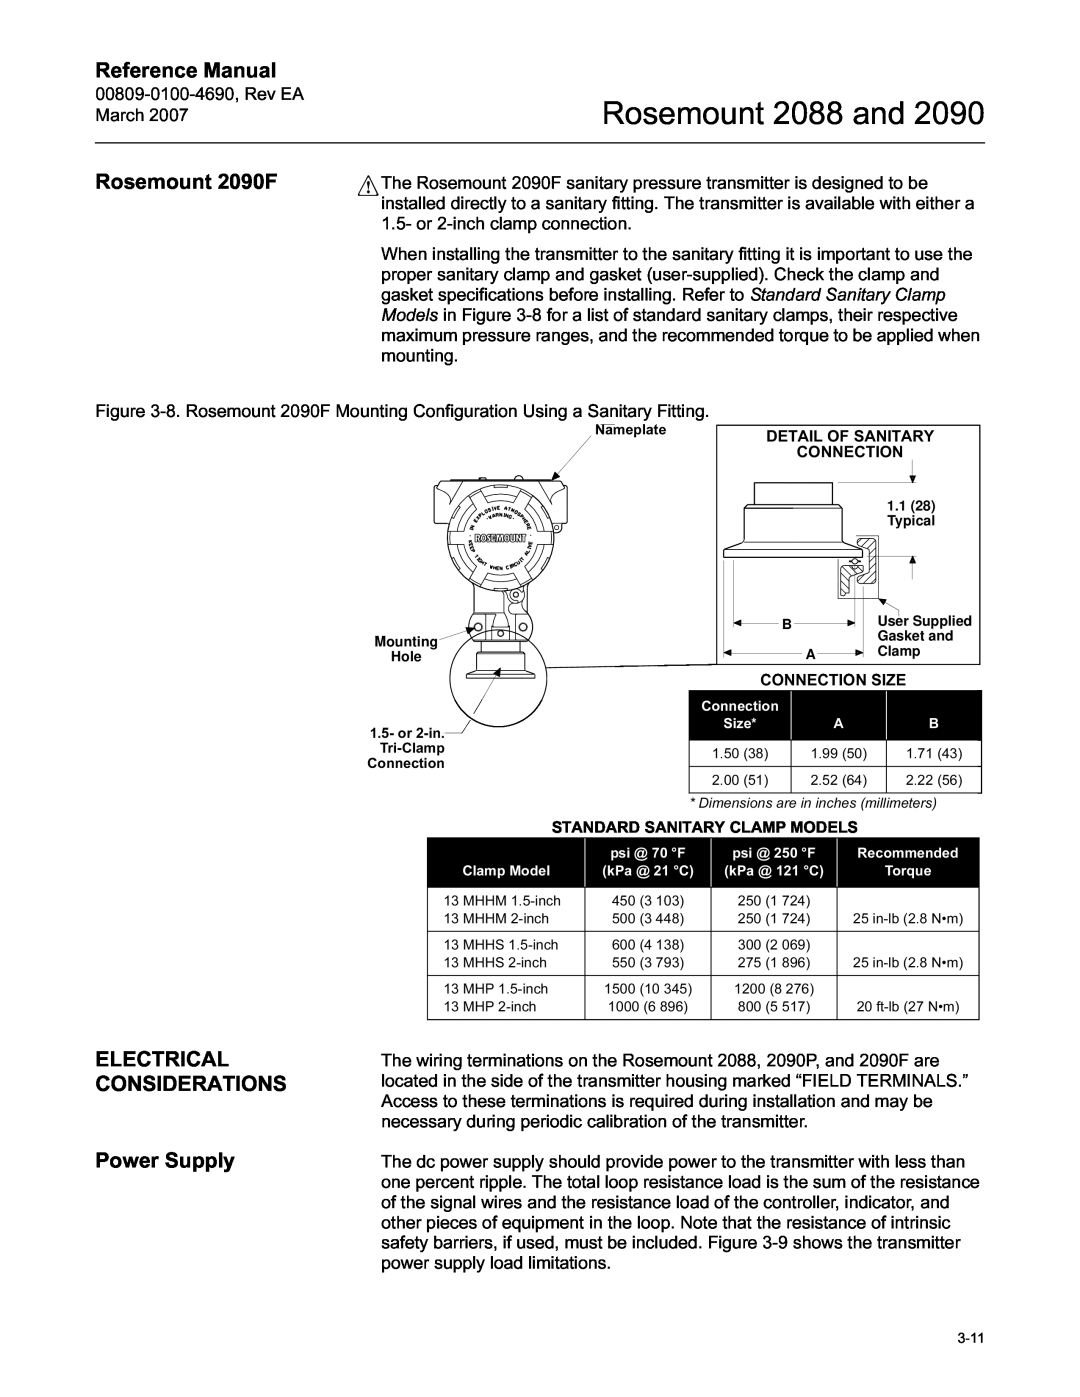 Emerson Process Management manual Rosemount 2090F, ELECTRICAL CONSIDERATIONS Power Supply, Rosemount 2088 and 